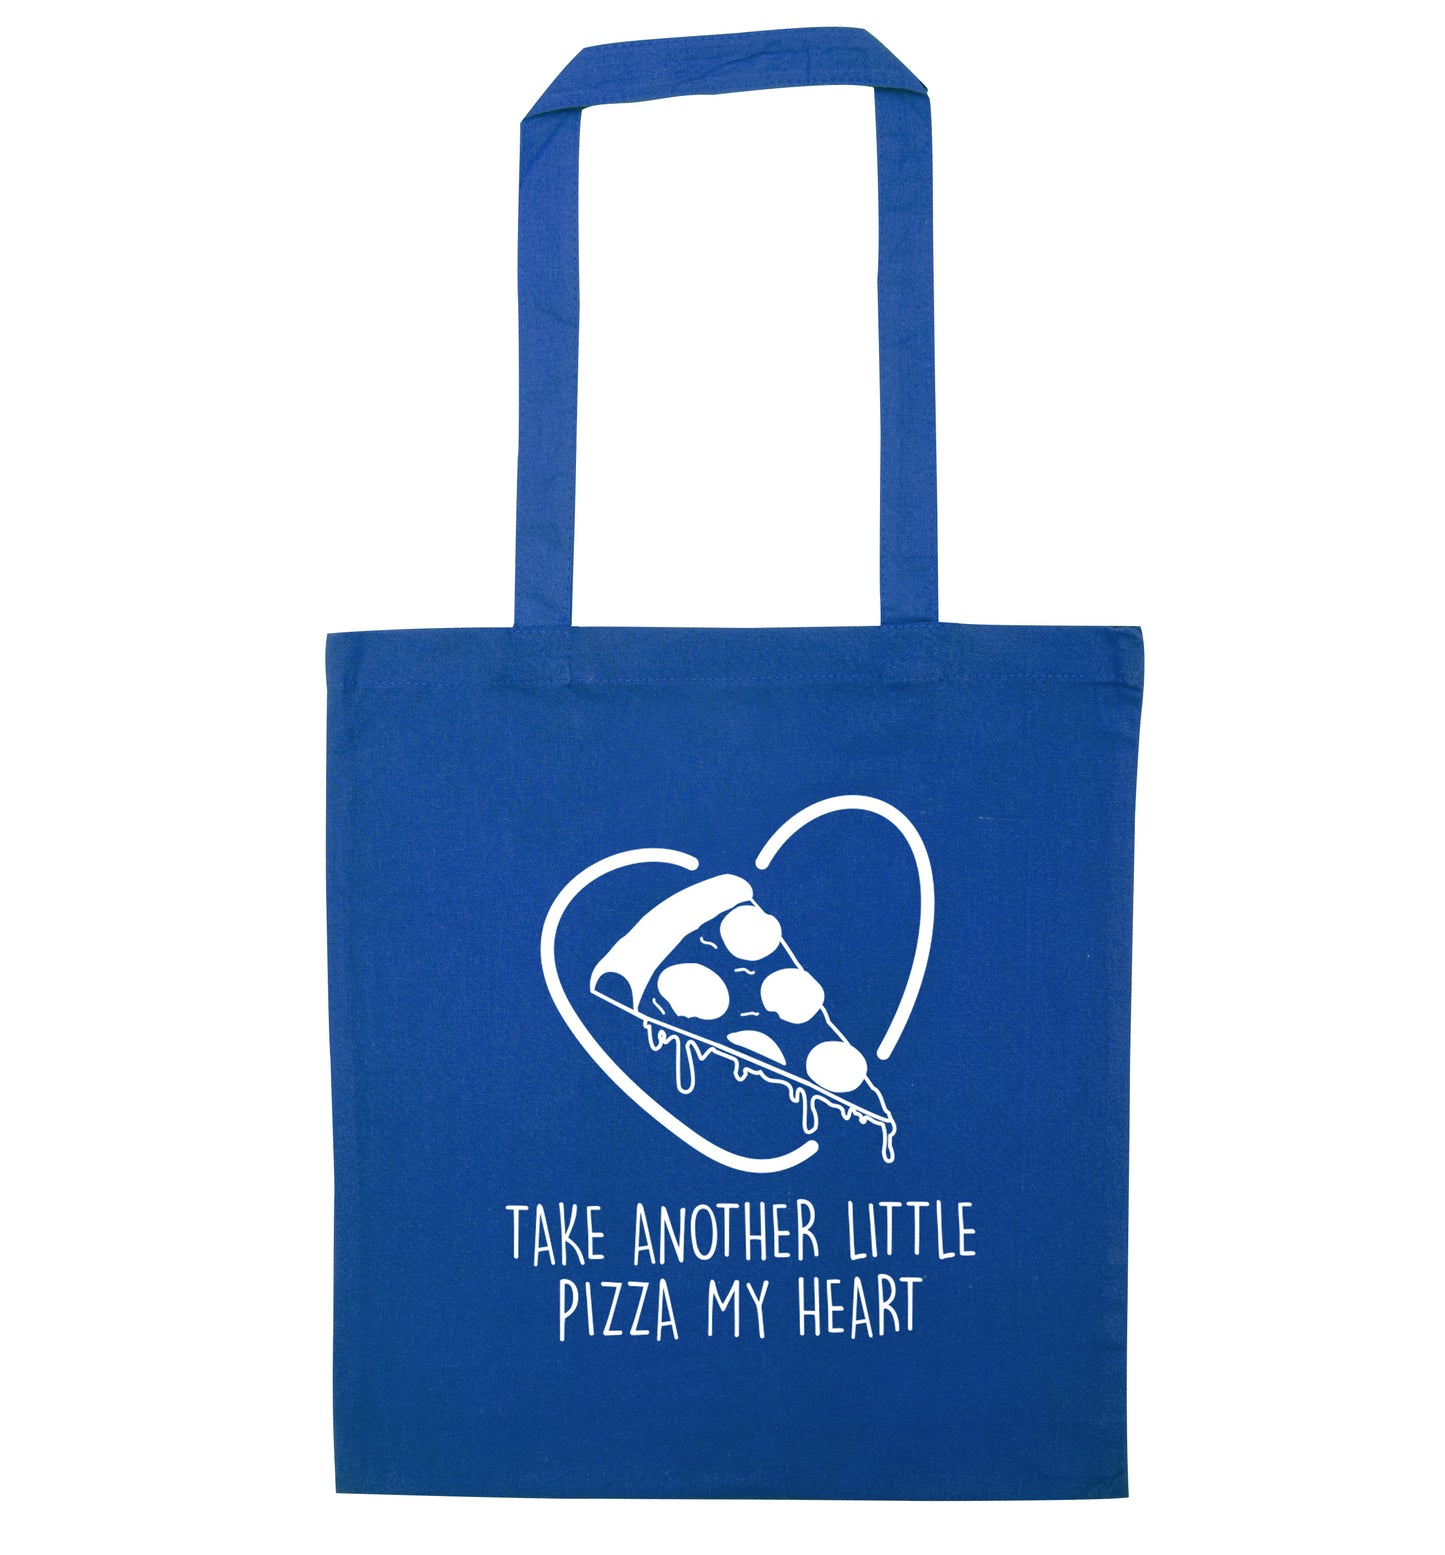 Take another little pizza my heart blue tote bag